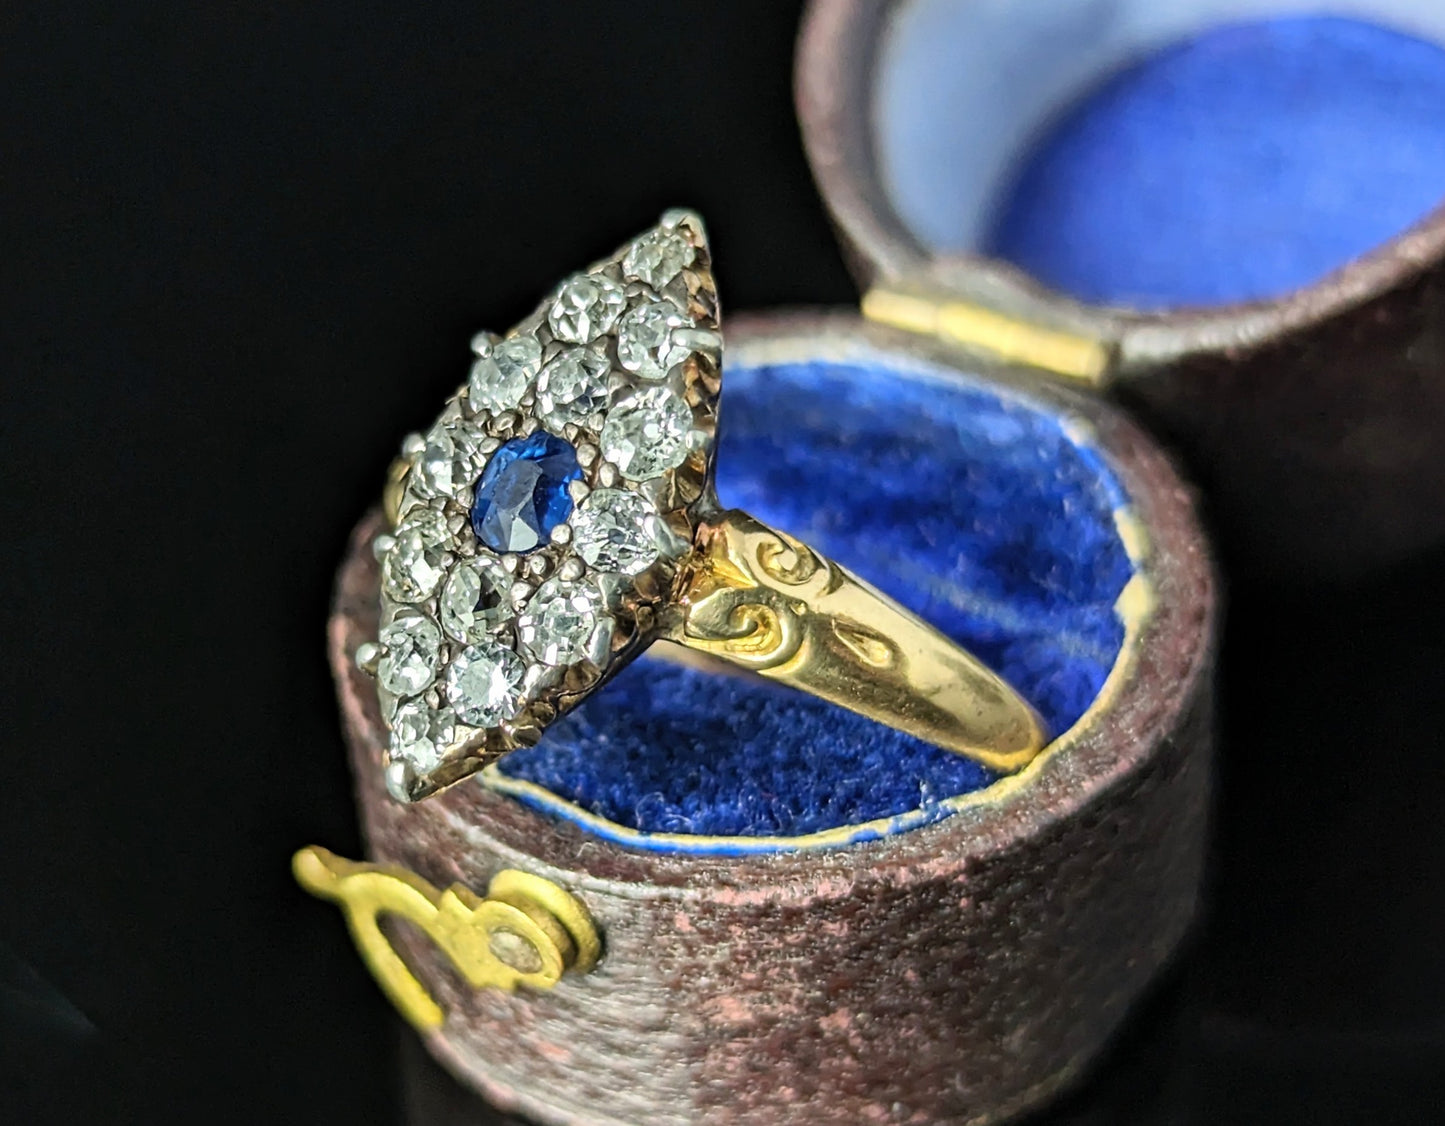 Antique Sapphire and Diamond navette ring, 18ct gold, Victorian